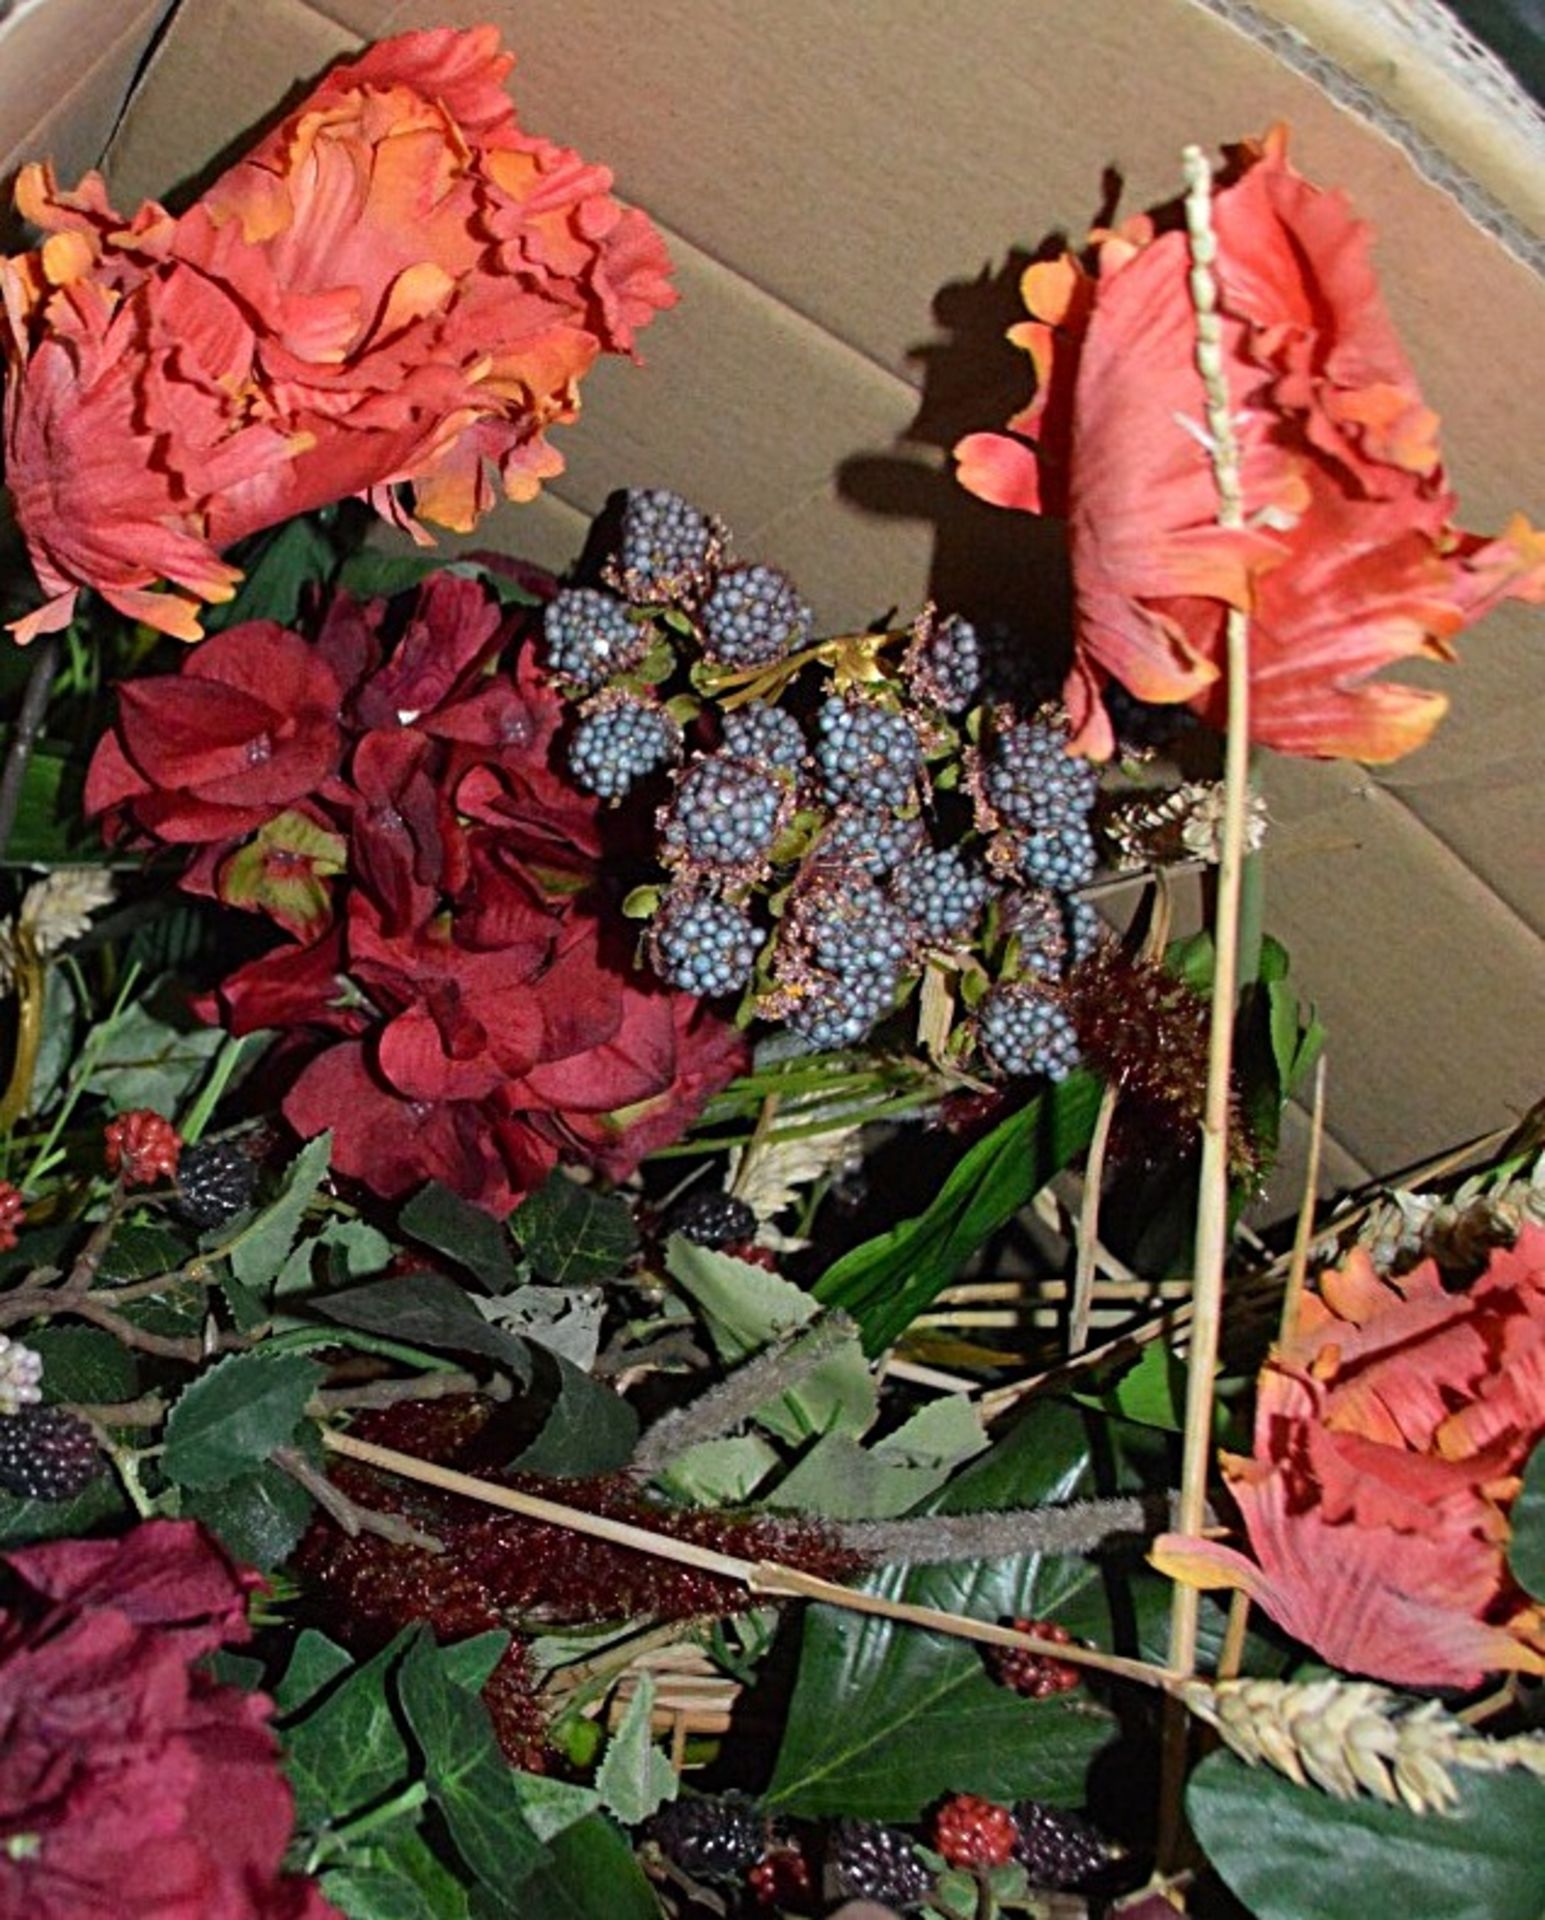 Large Box Of Artificial Wild Flowers and Dried Wheat From High Profile Window / Shop Displays - Image 6 of 7